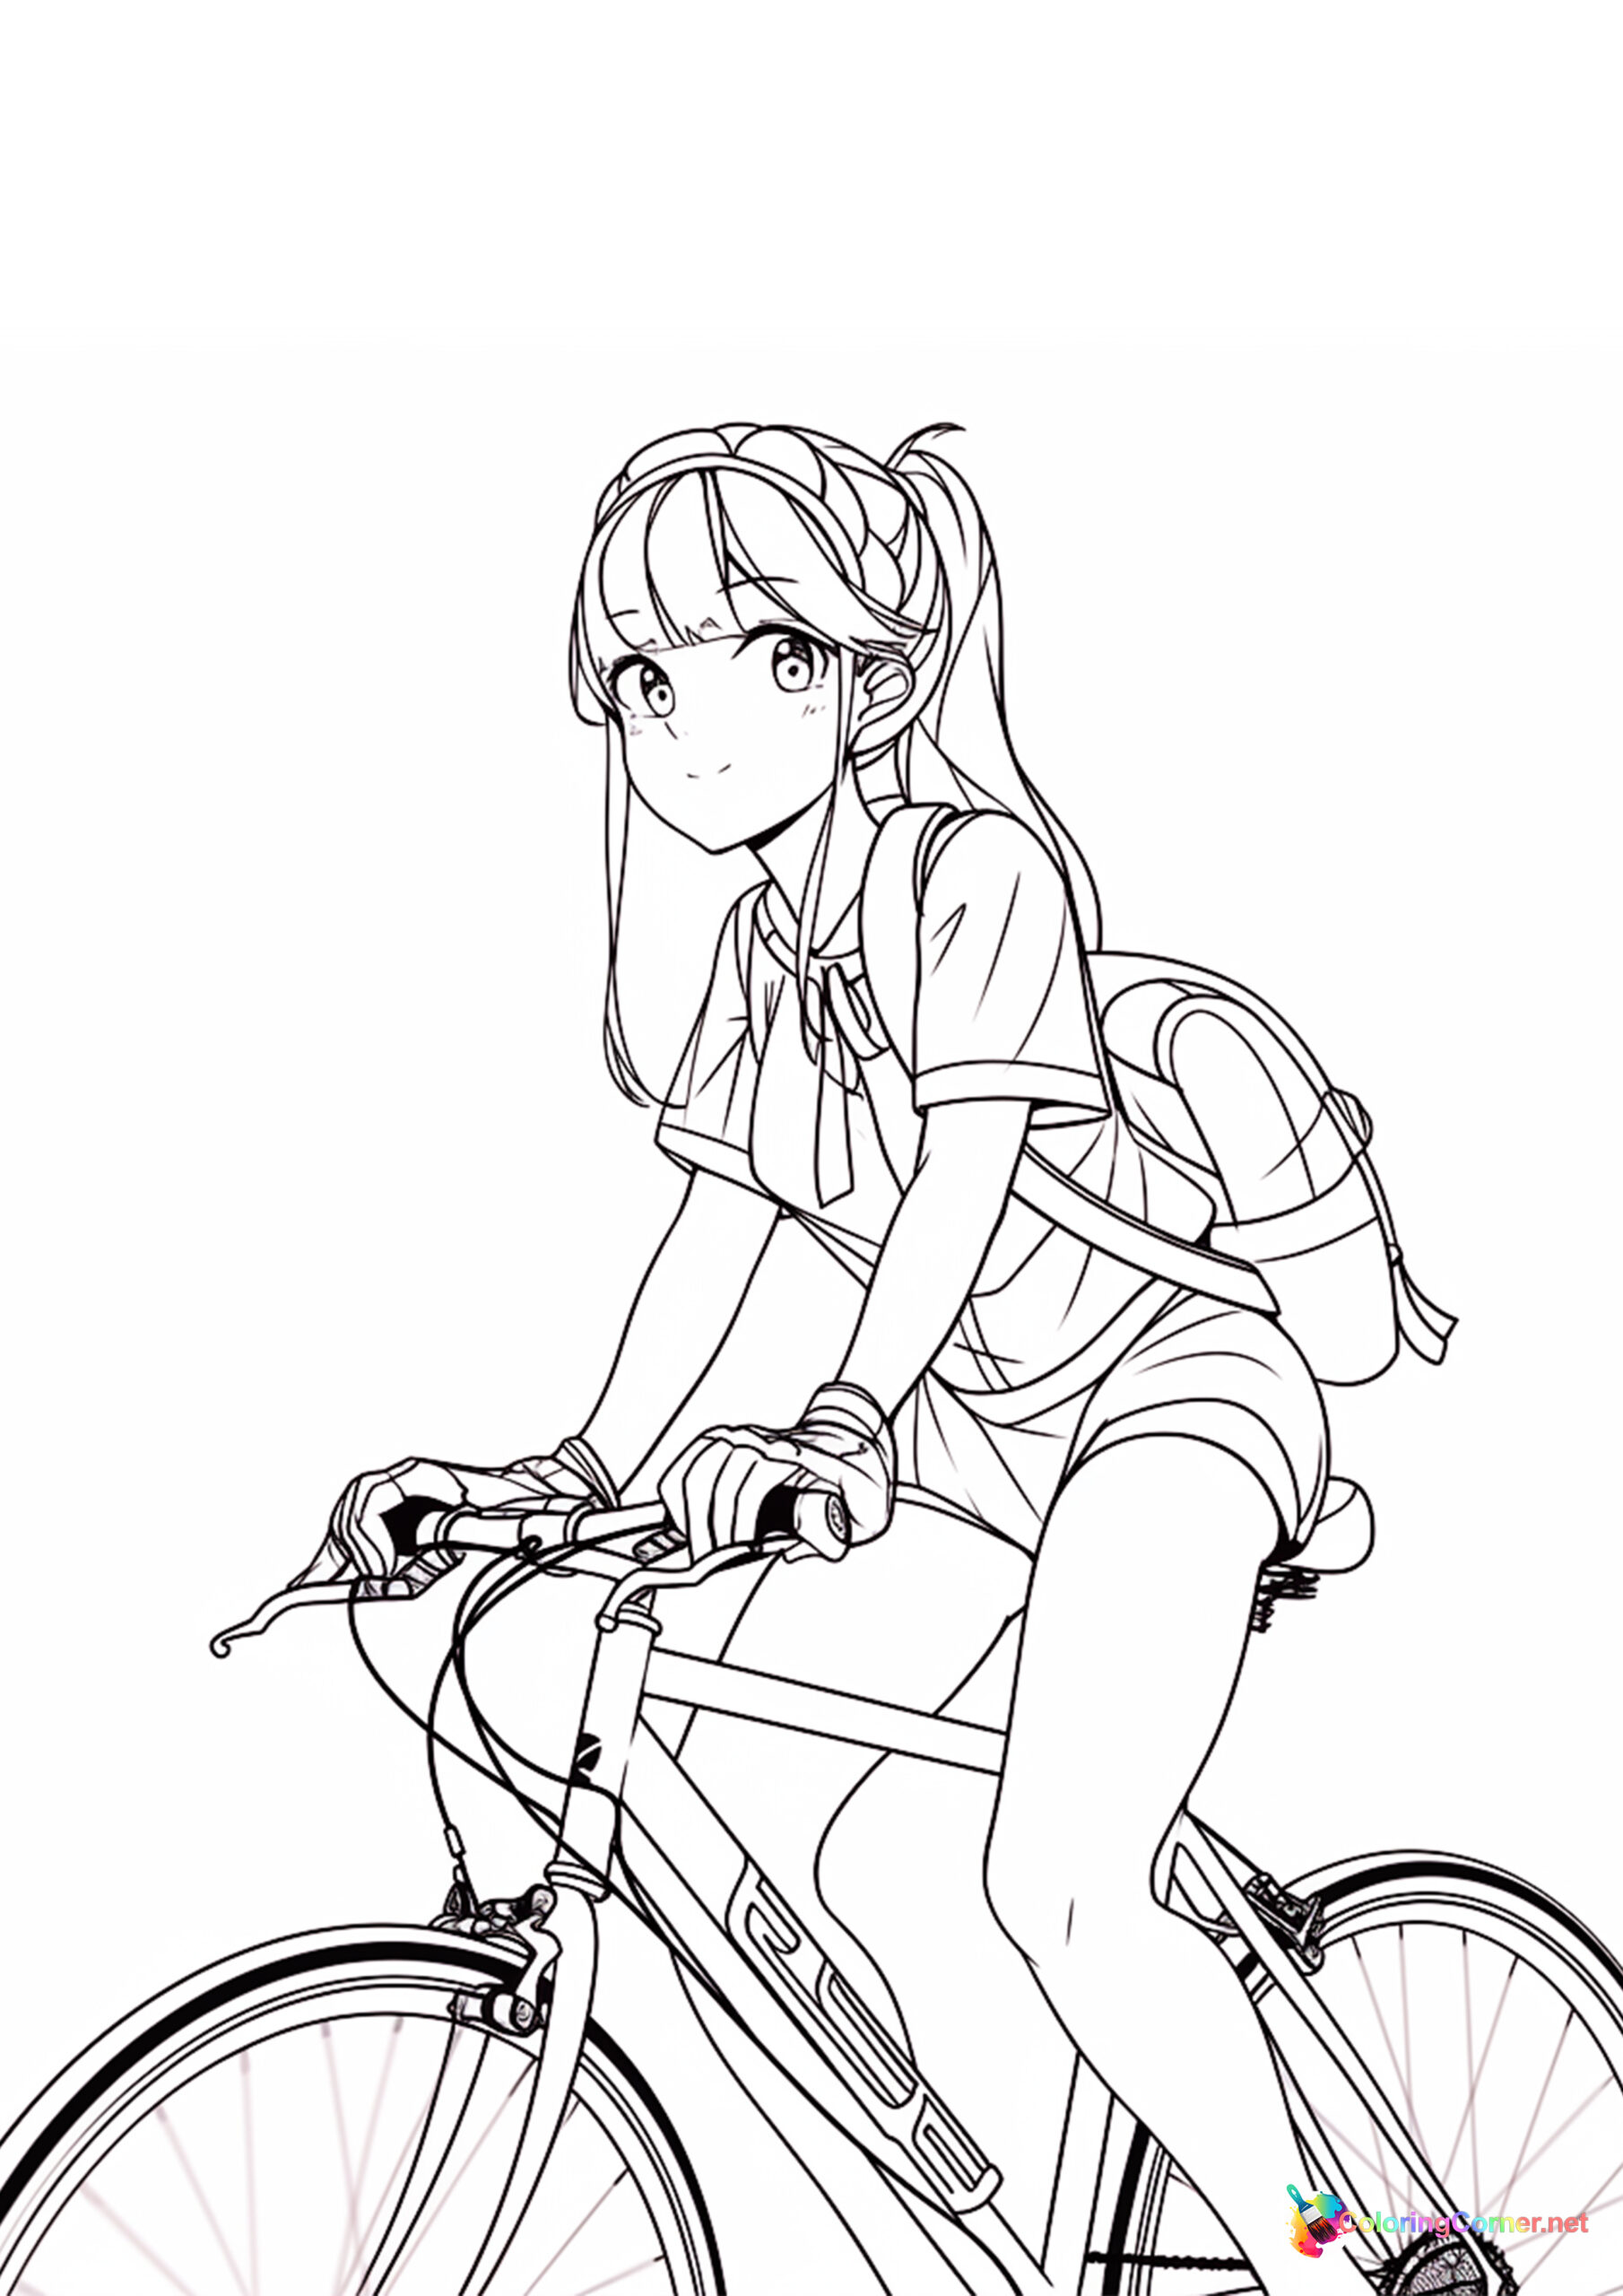 bicycle coloring page